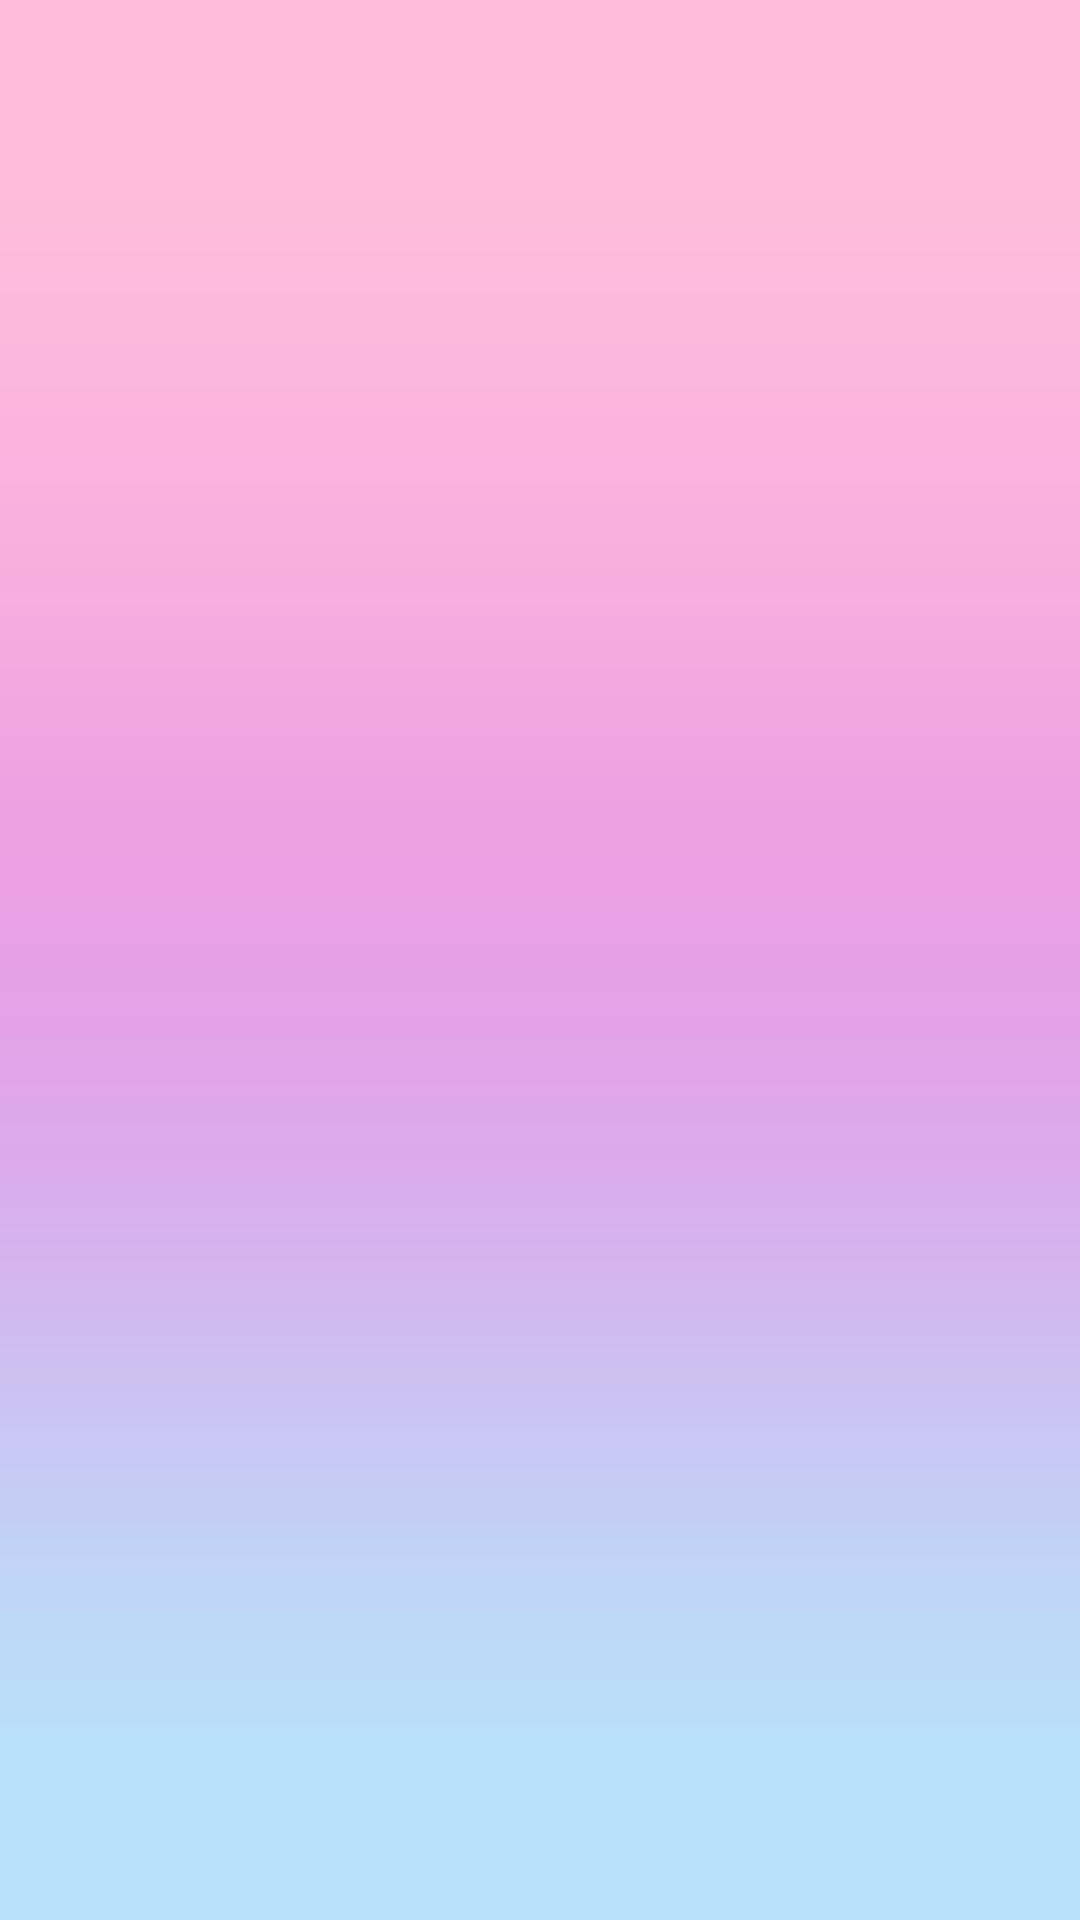 Cute Pastel Colors Abstract Design Background